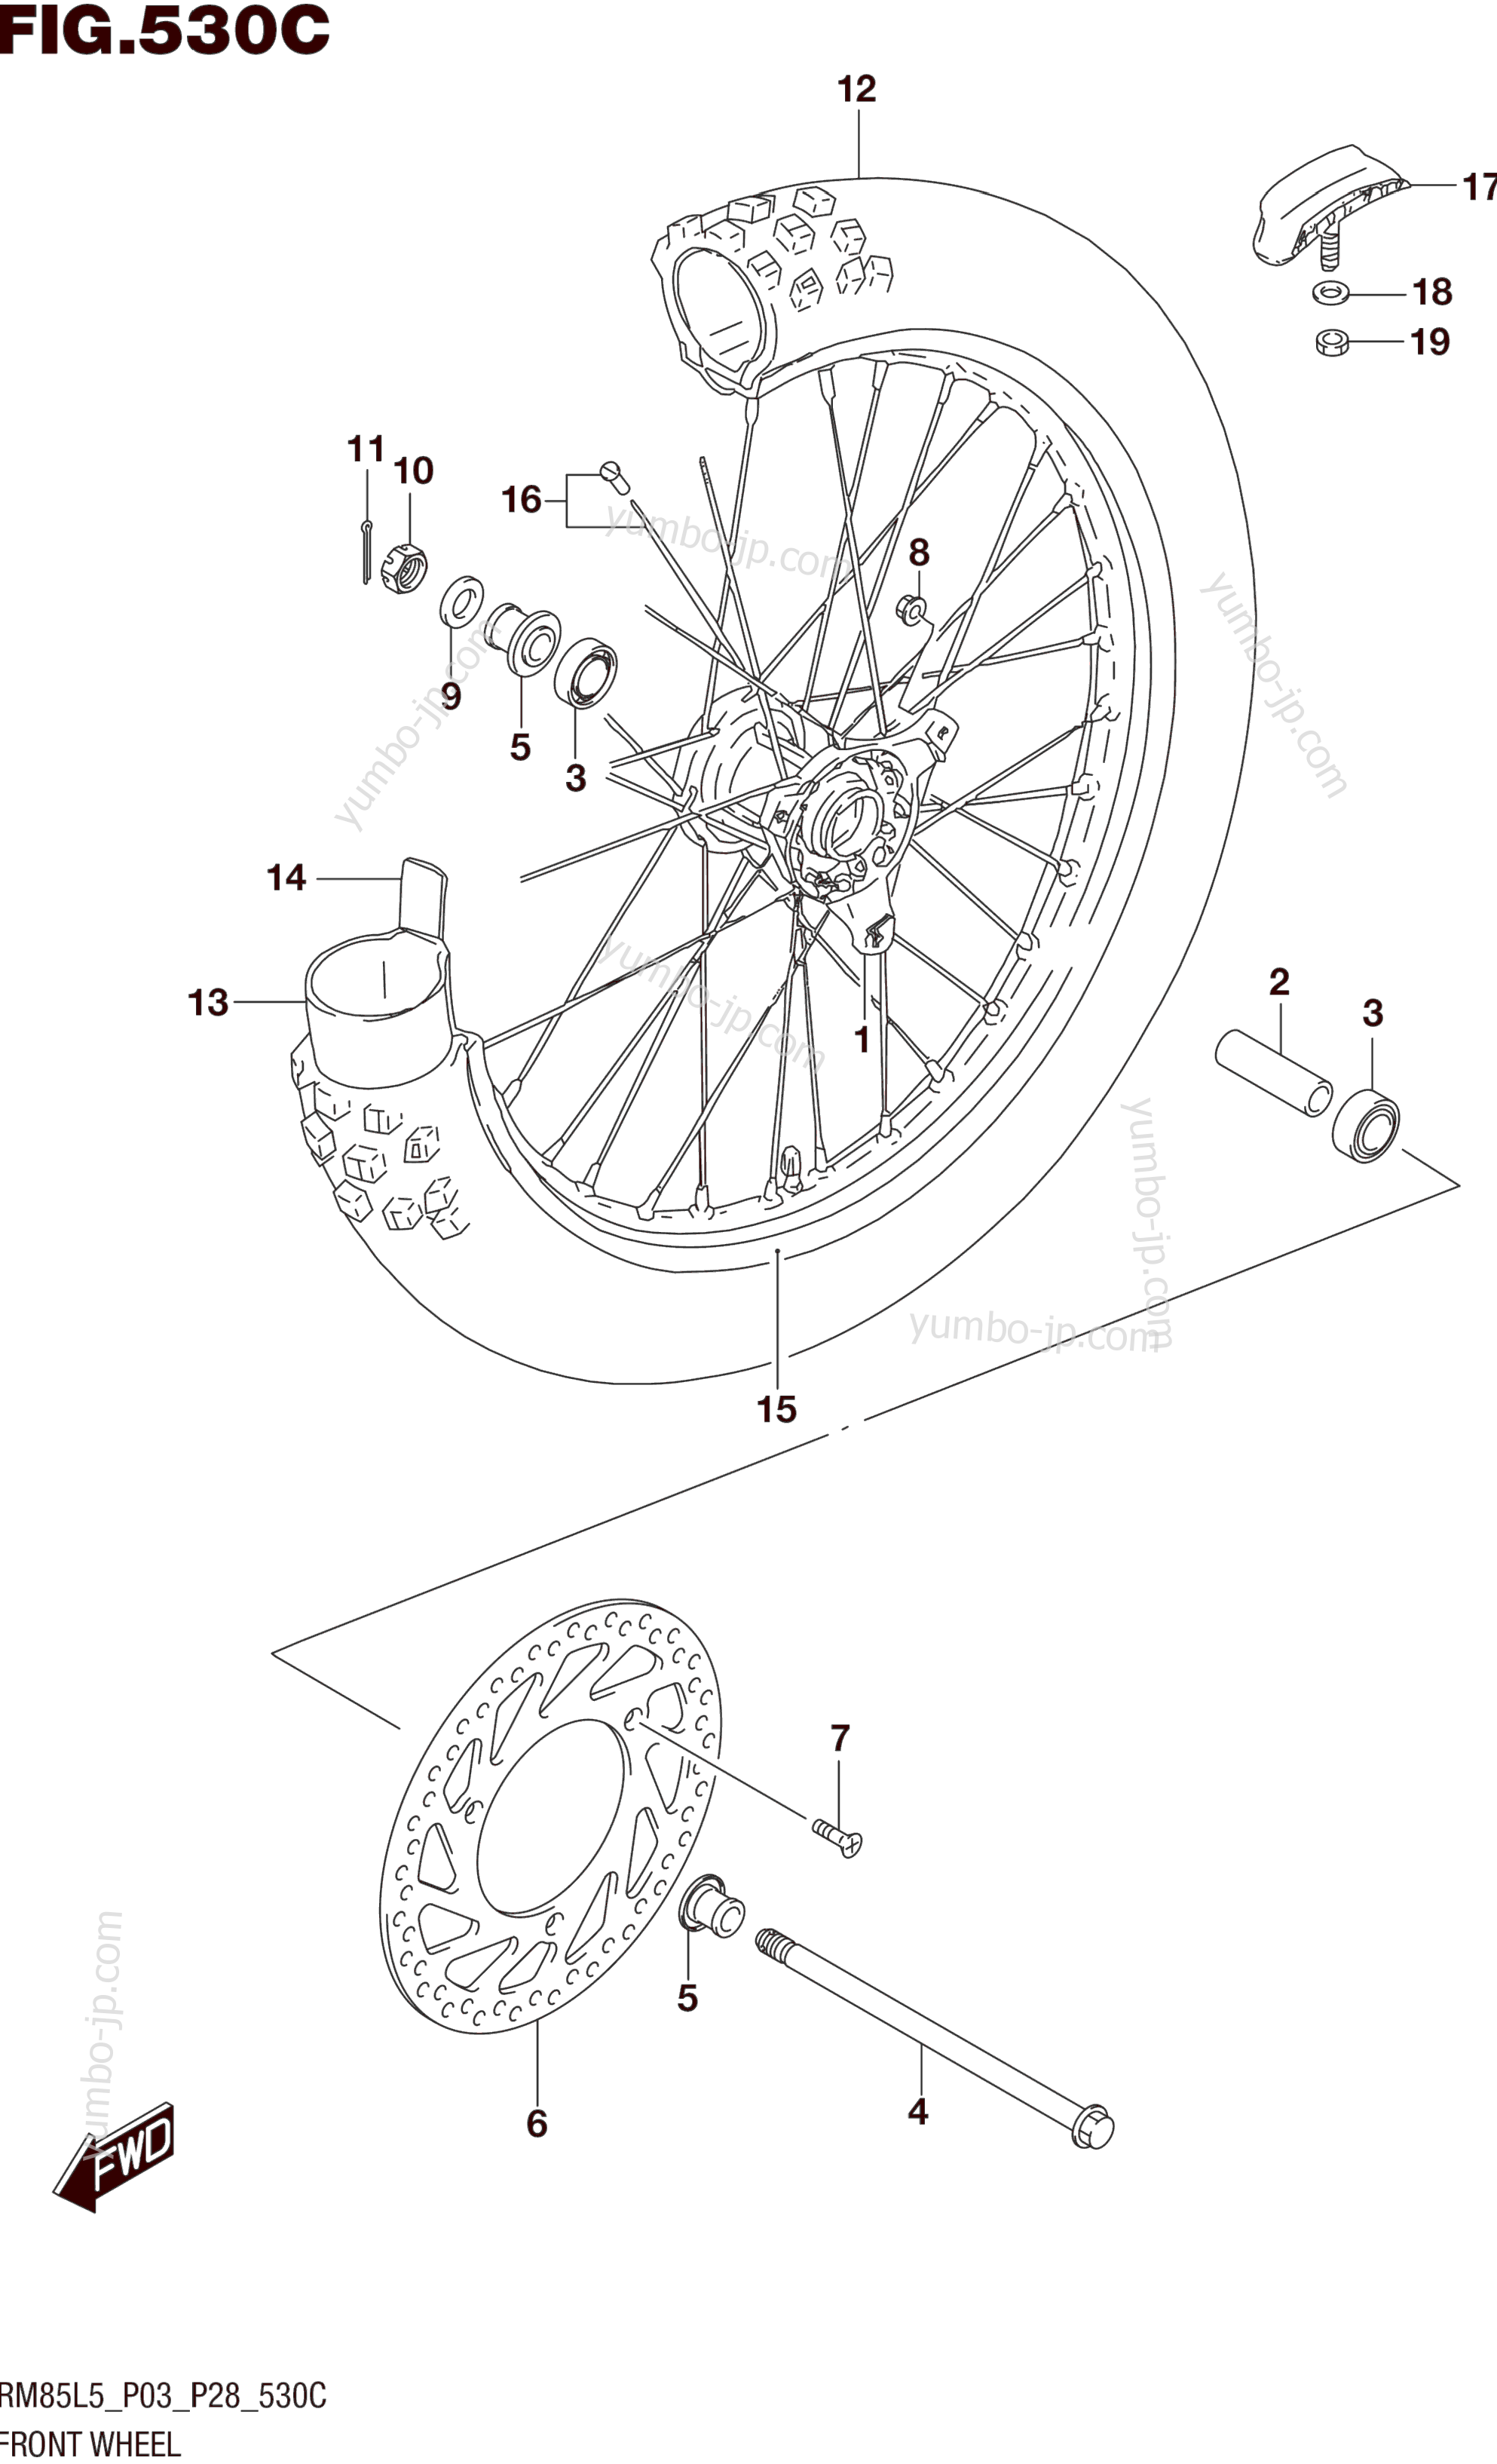 FRONT WHEEL (RM85LL5 P28) for motorcycles SUZUKI RM85L 2015 year